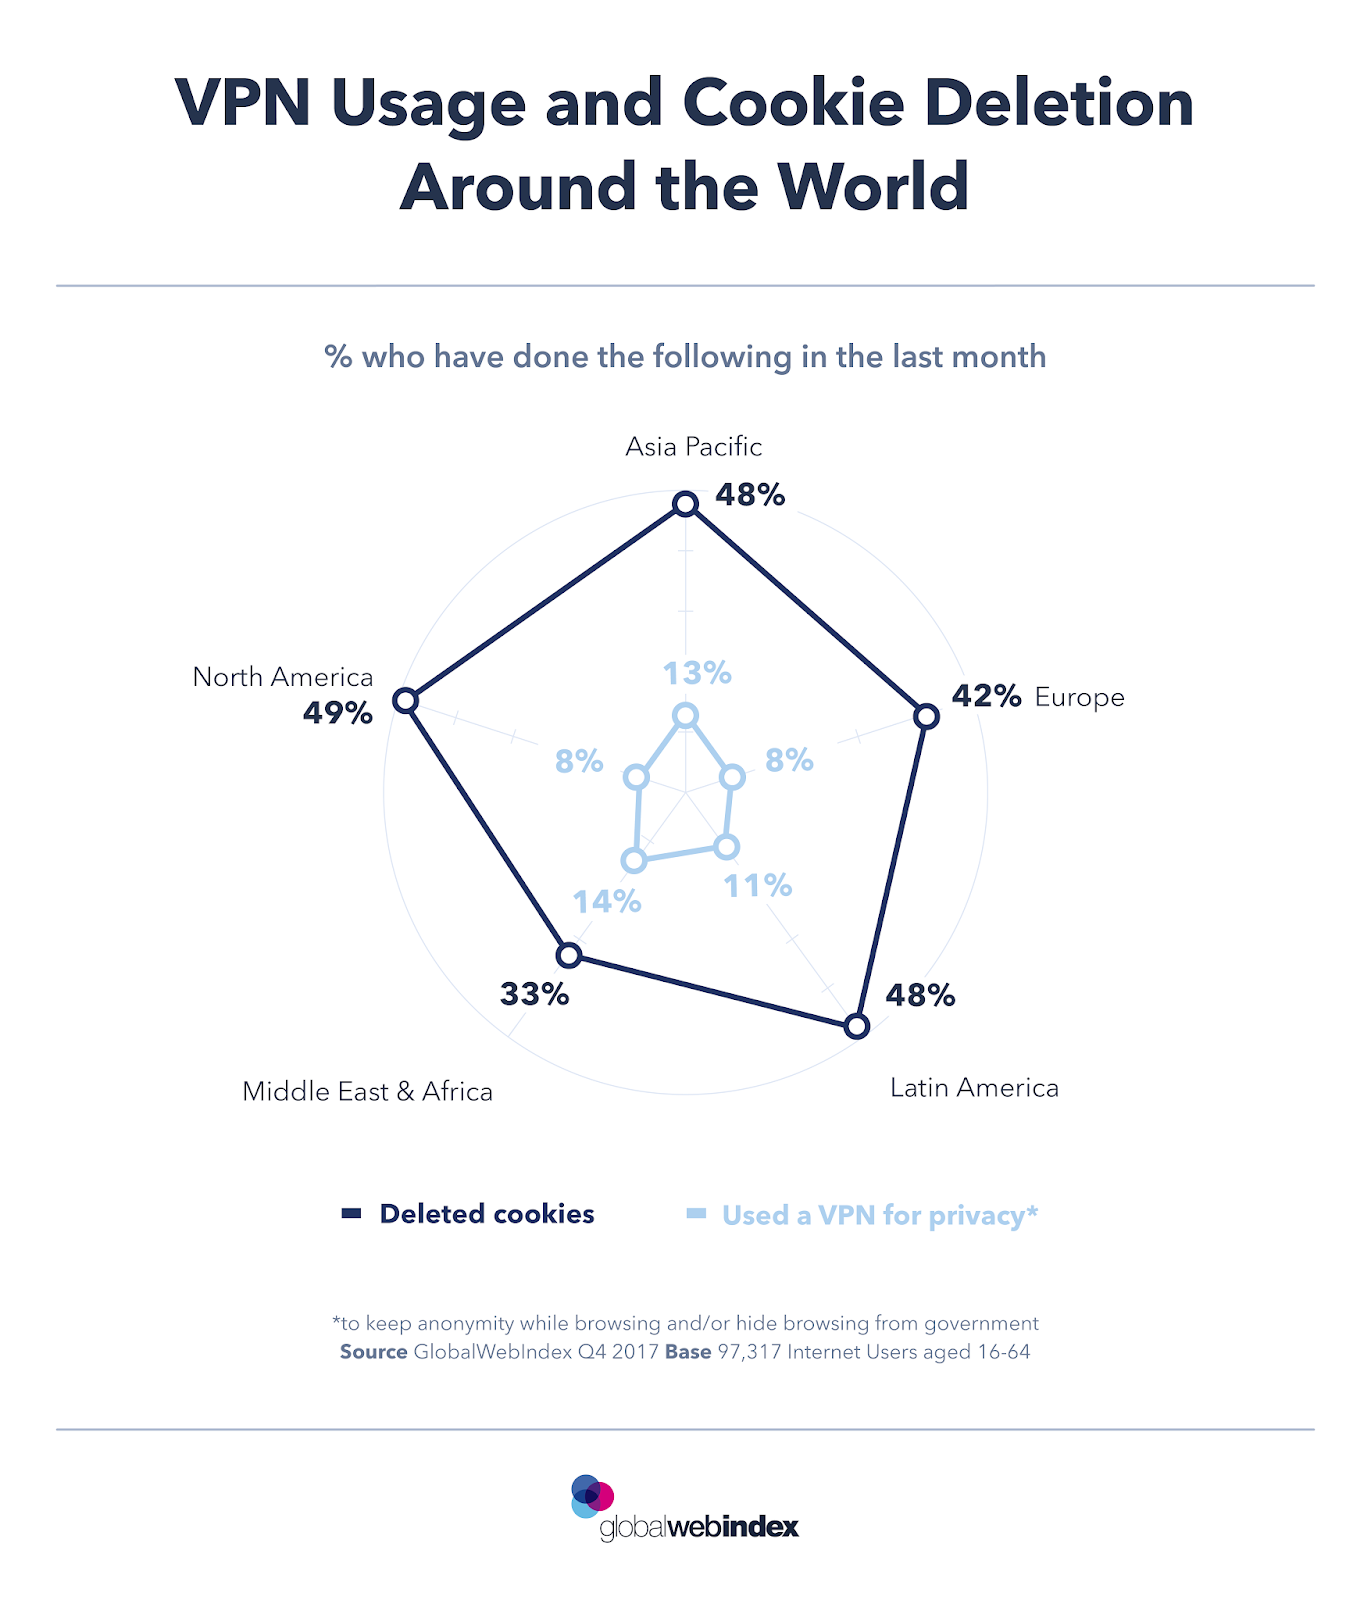 infographic - VPN Usage and Cookie Deletion Around the World